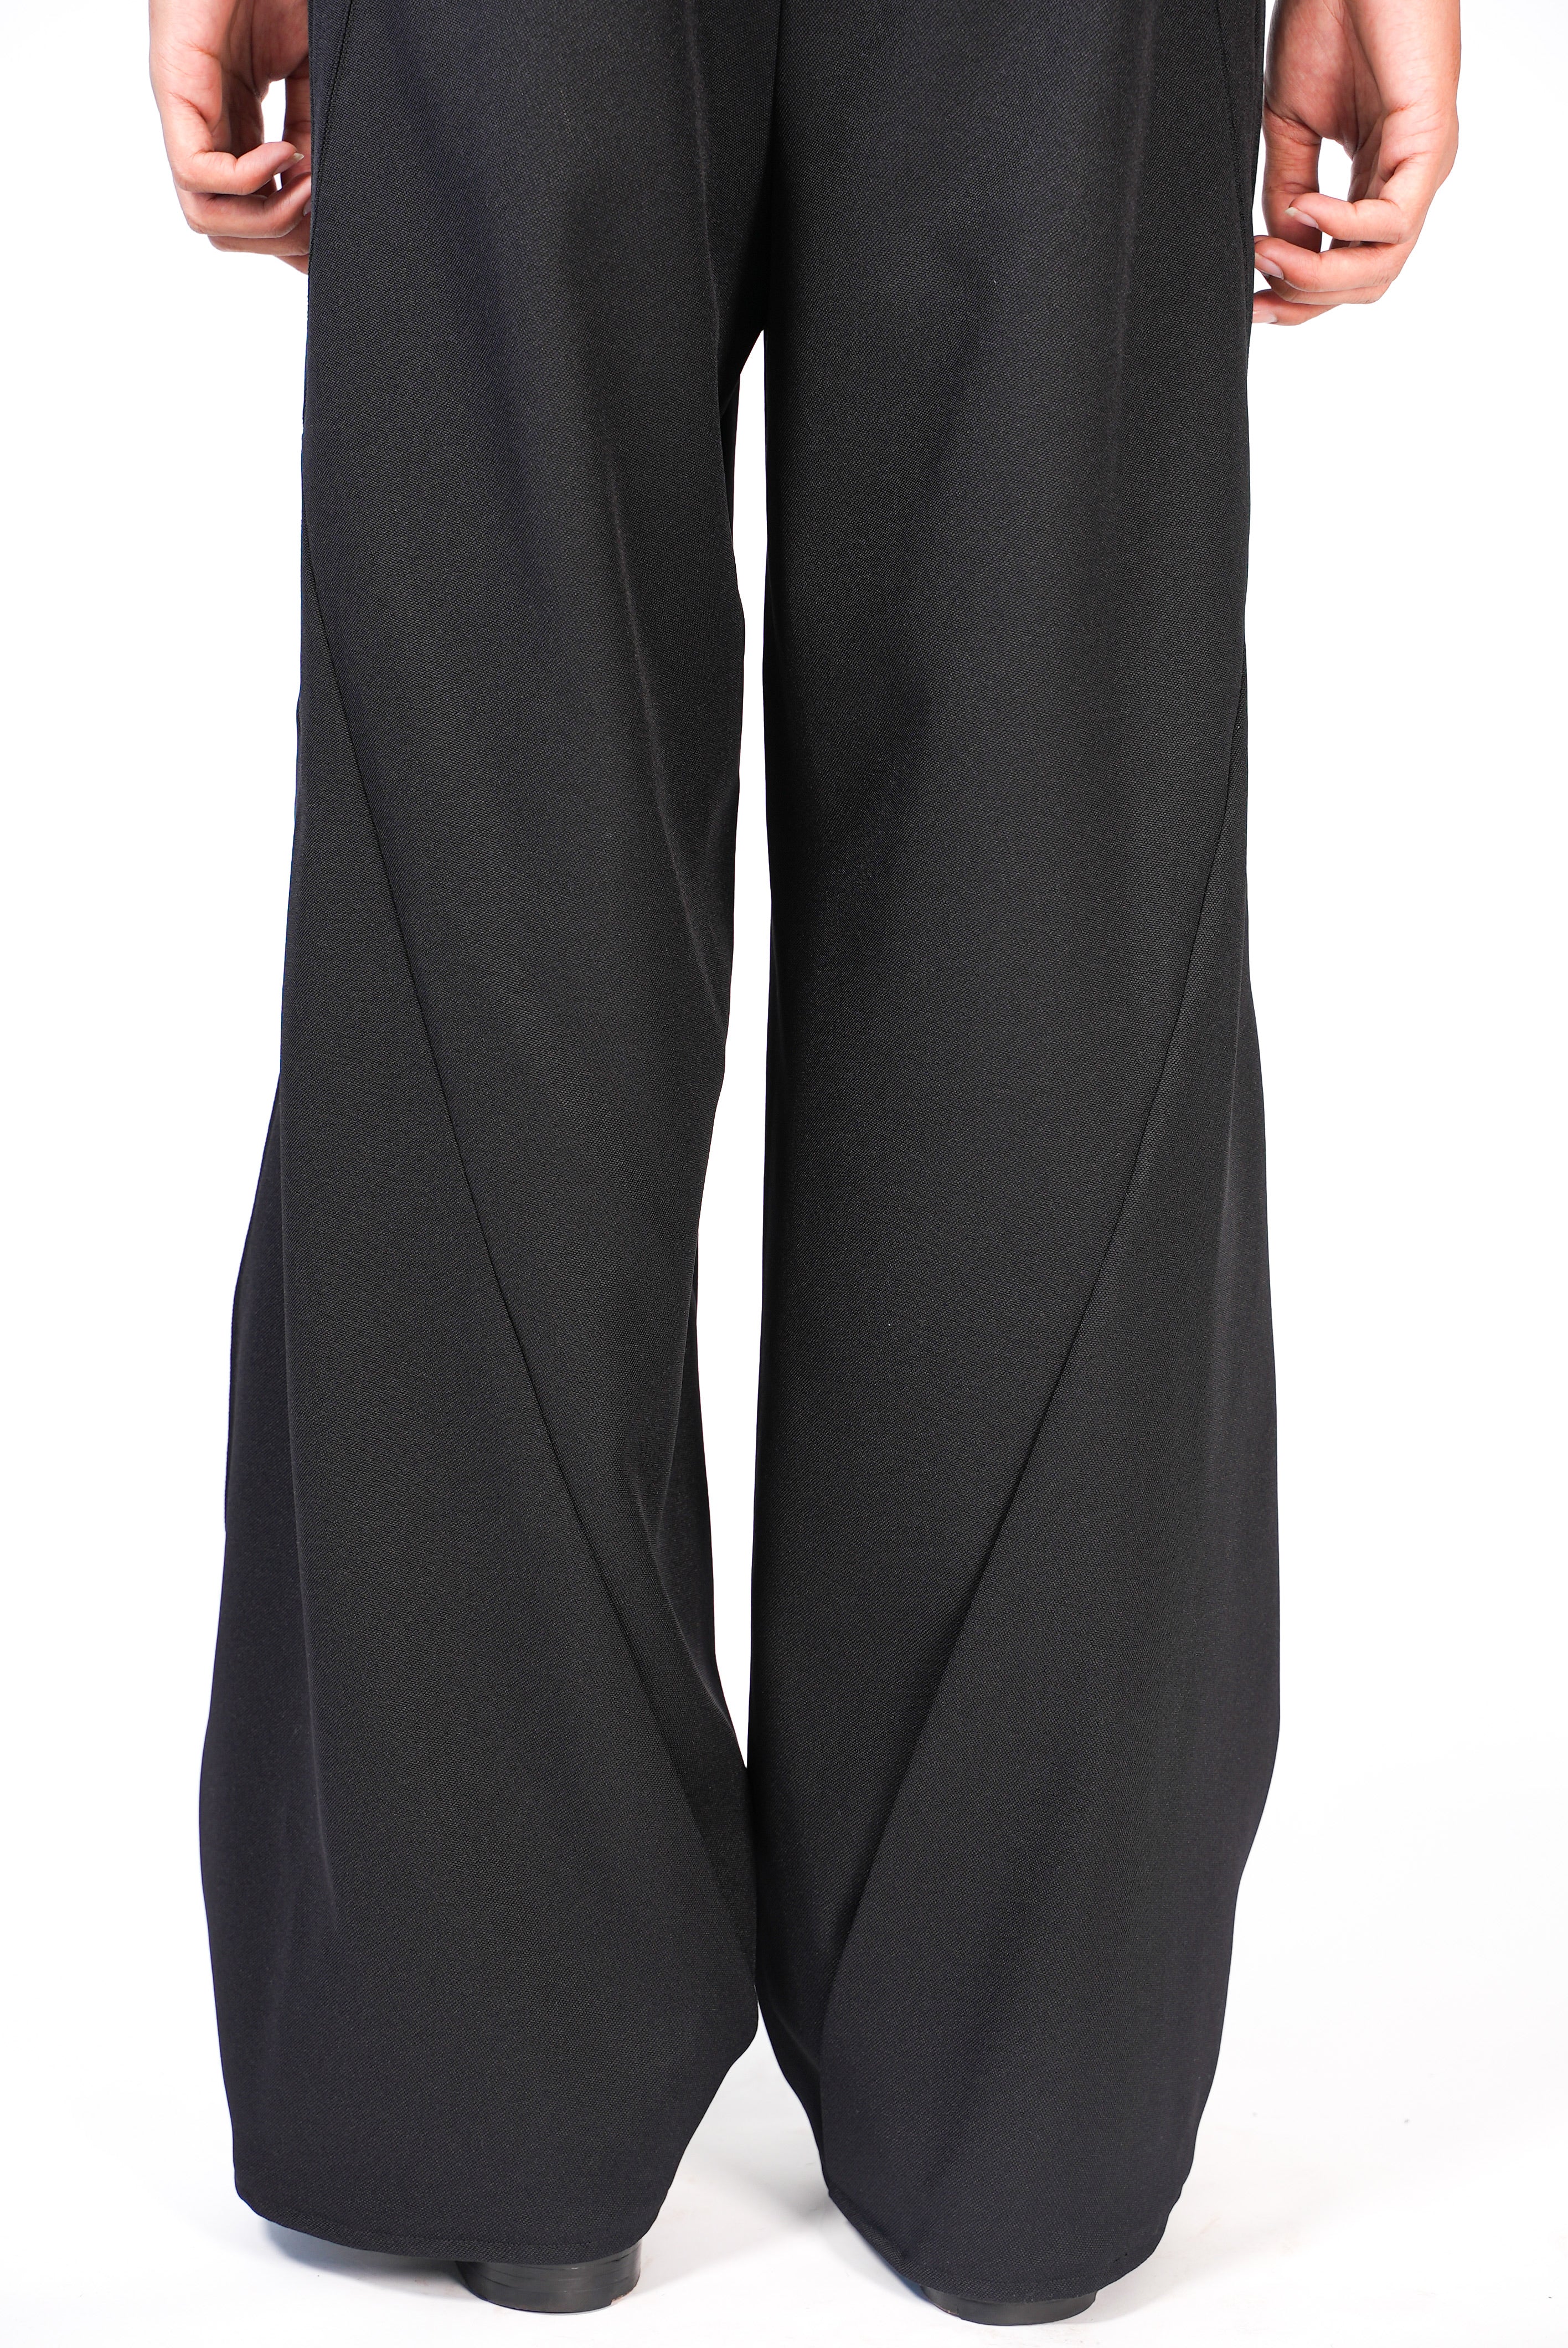 strong 003 trousers black 48キコスタディノフ